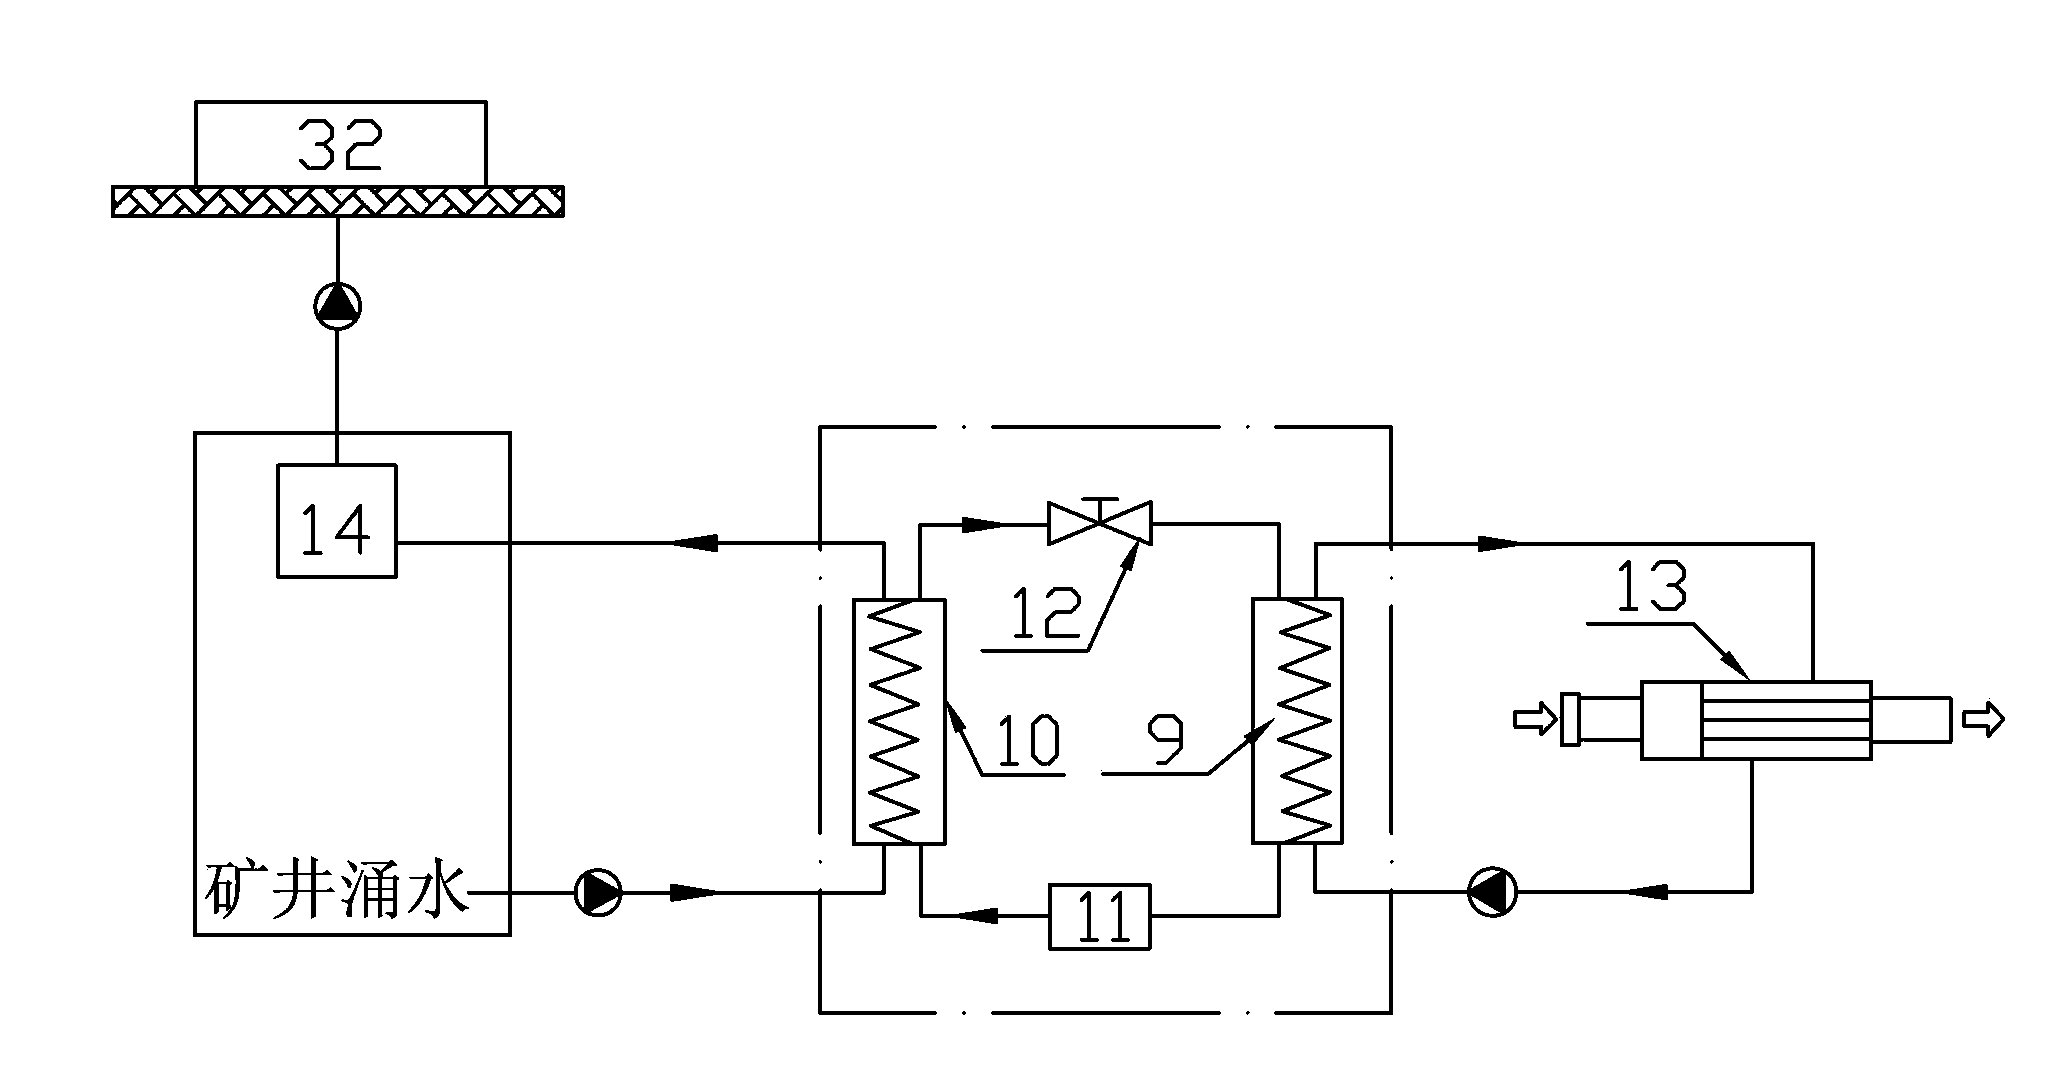 System and method by means of power plant waste heat for conducting aeration cooling on mine